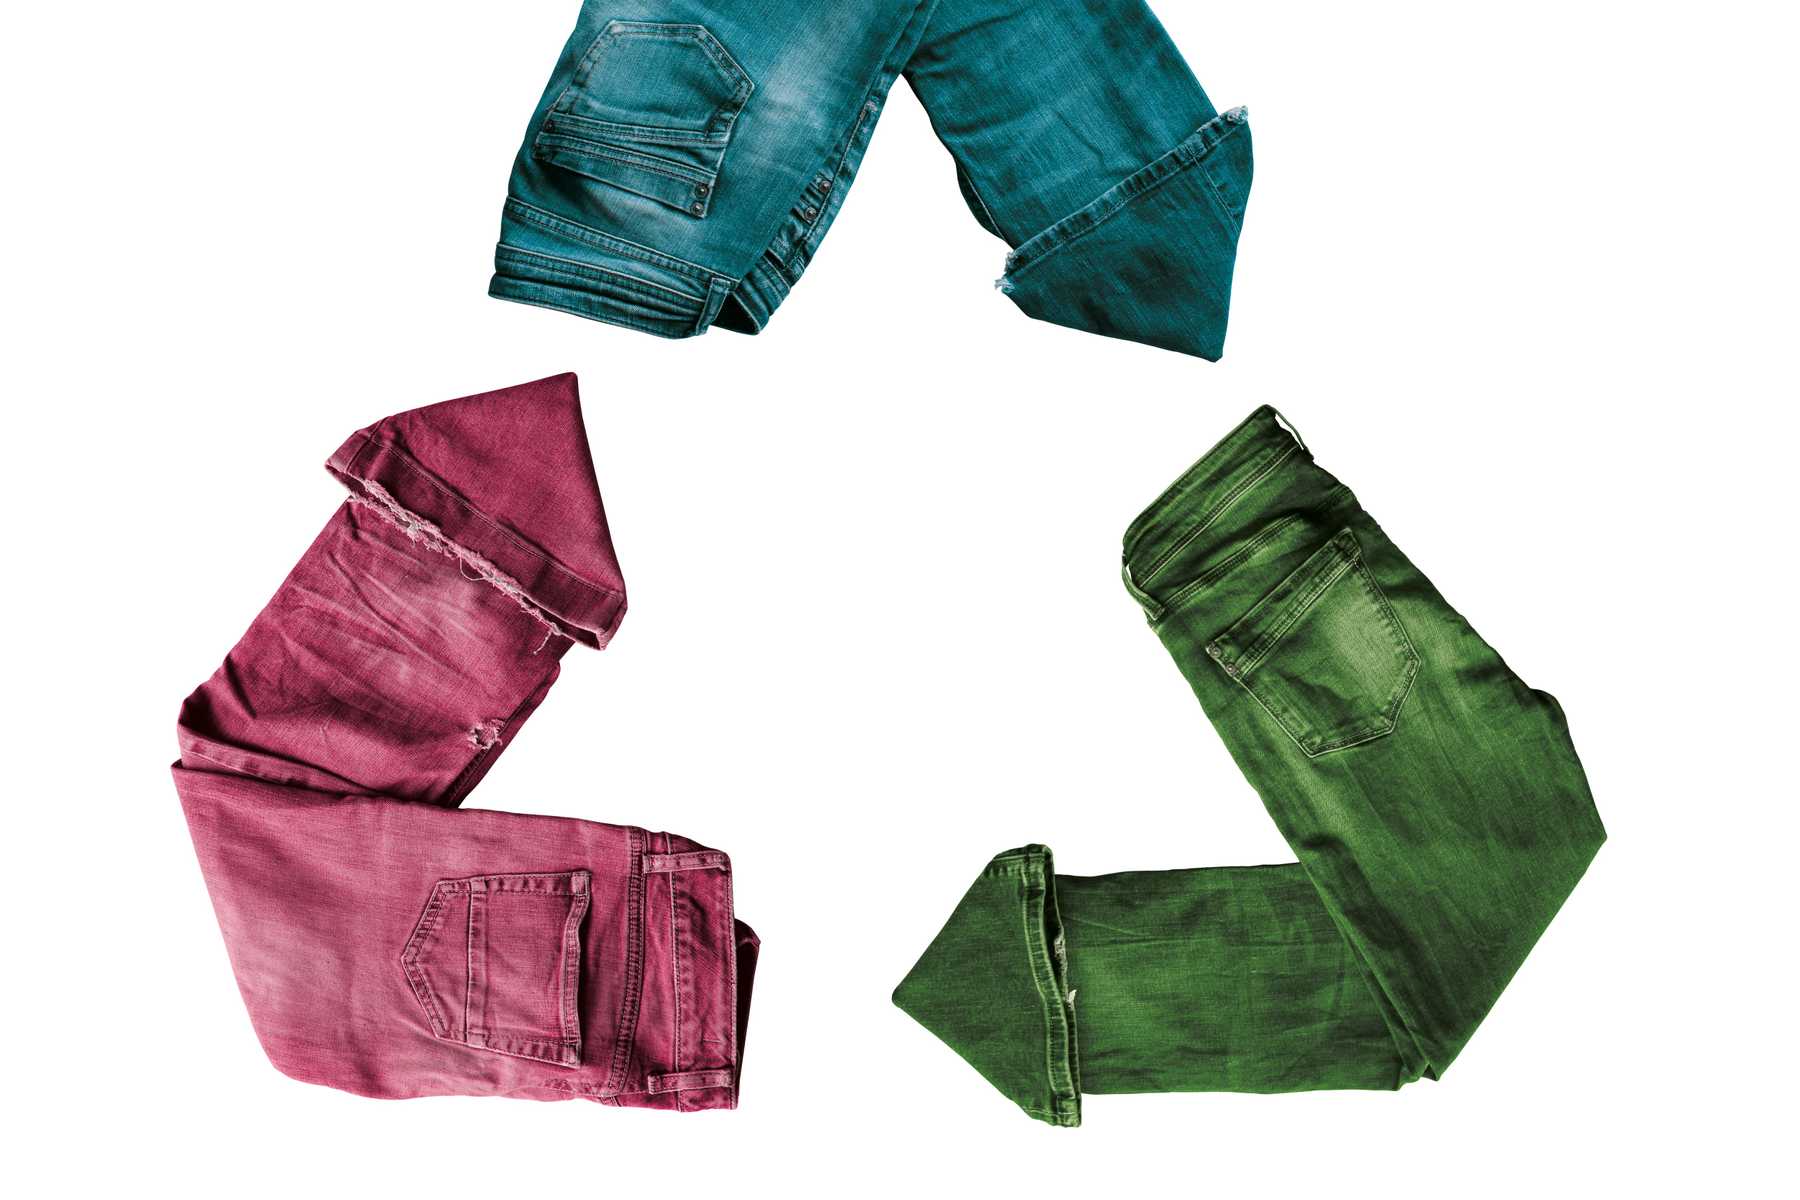 Creative Ideas To Reuse Reduce And Recycle Old Clothes Part 2 Towards Sustainability